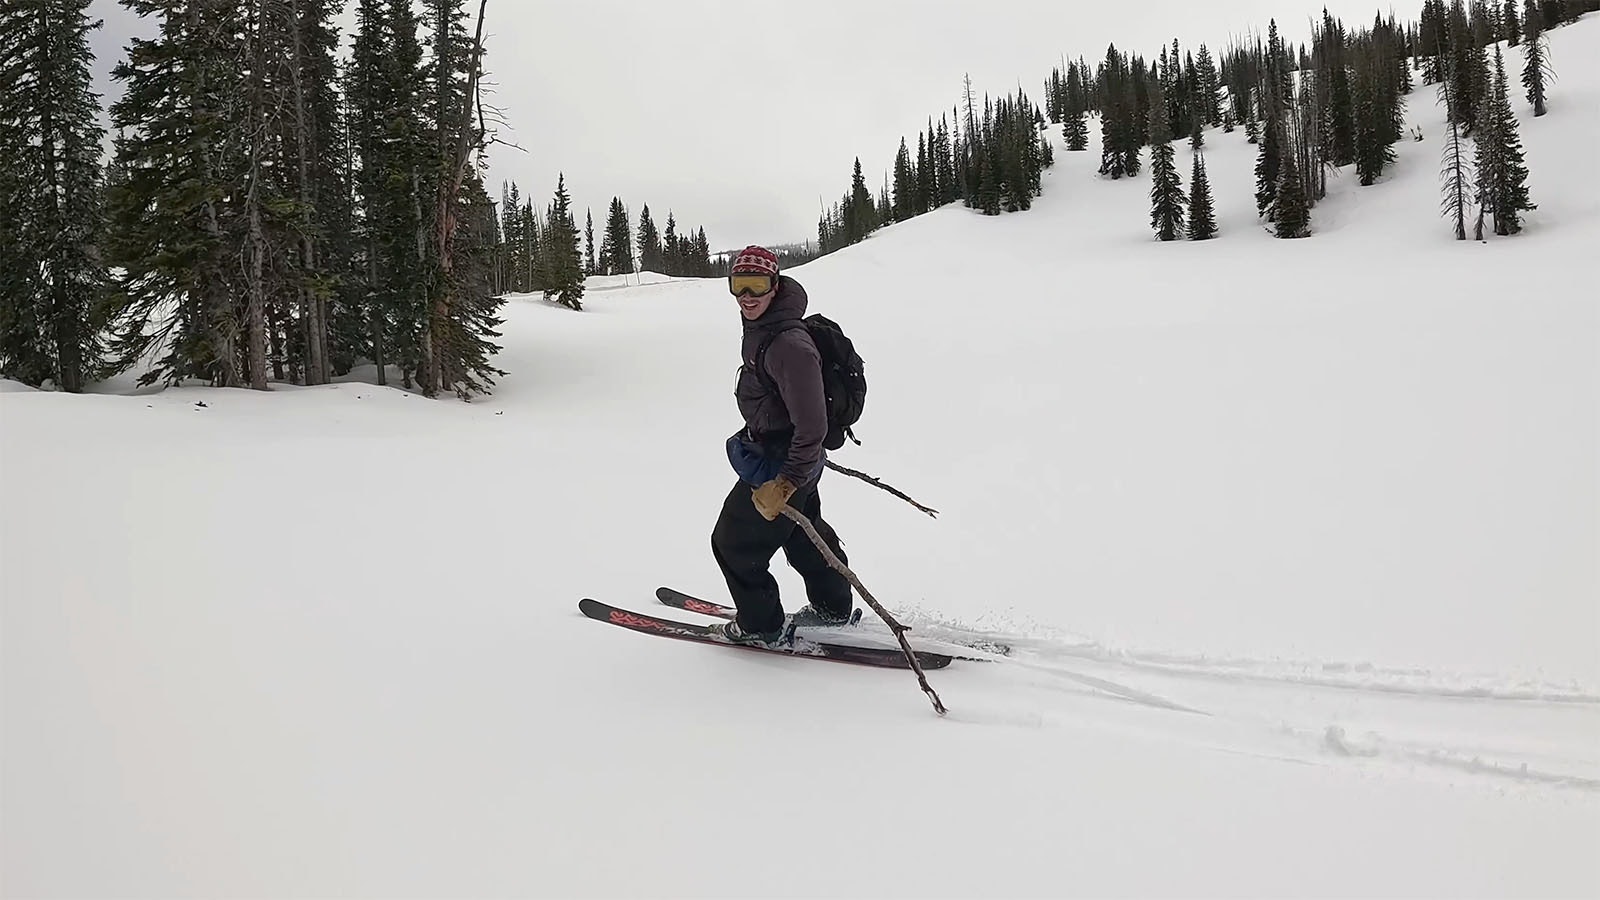 Nick Fadial of Laramie enjoys midseason backcountry skiing conditions in Wyomng's Snowy Range over the Memorial Day weekend.